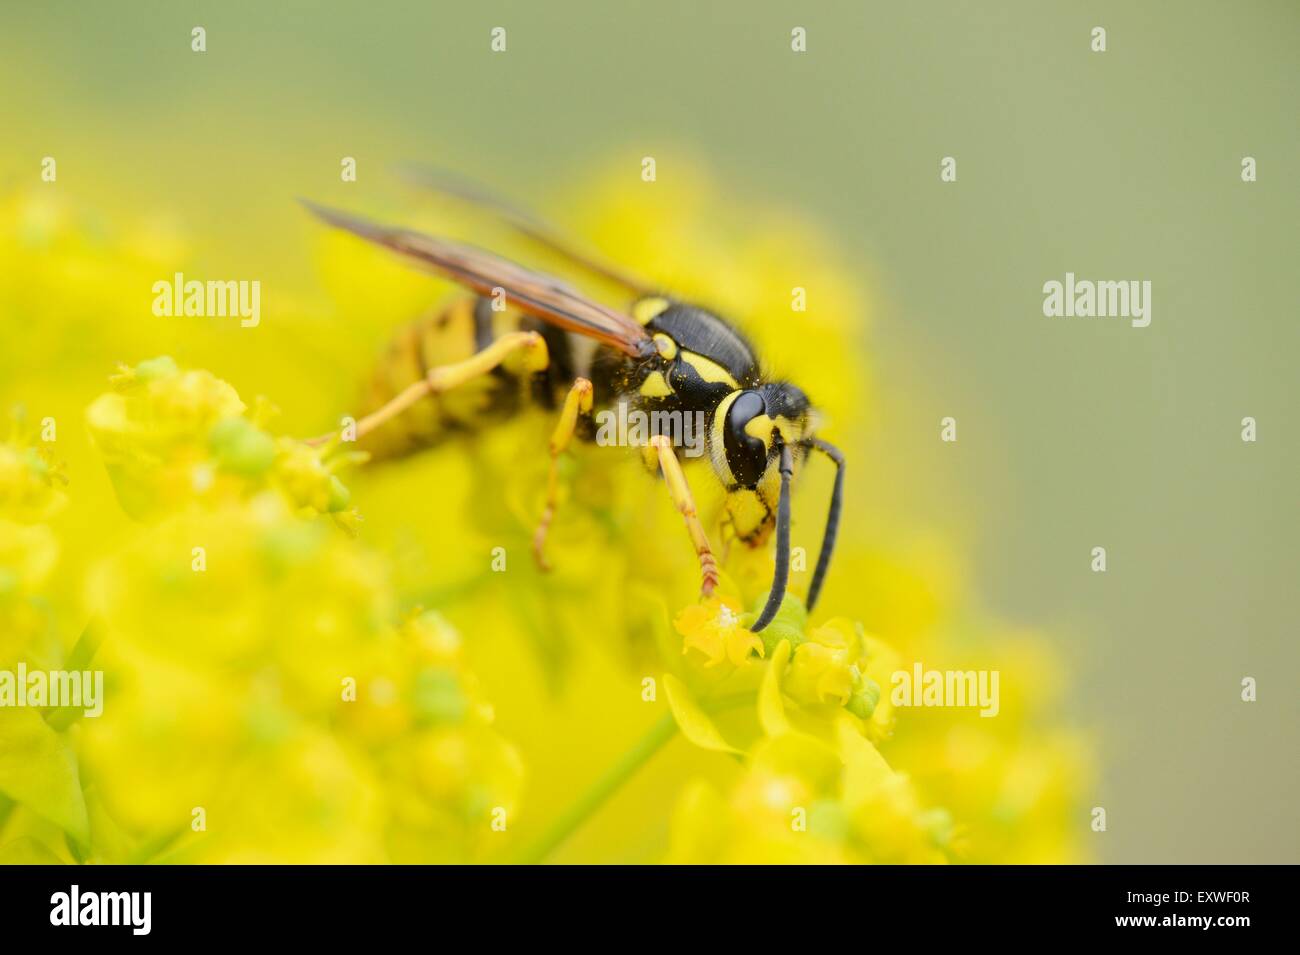 Close-up of a common wasp on a cypress spurge Stock Photo